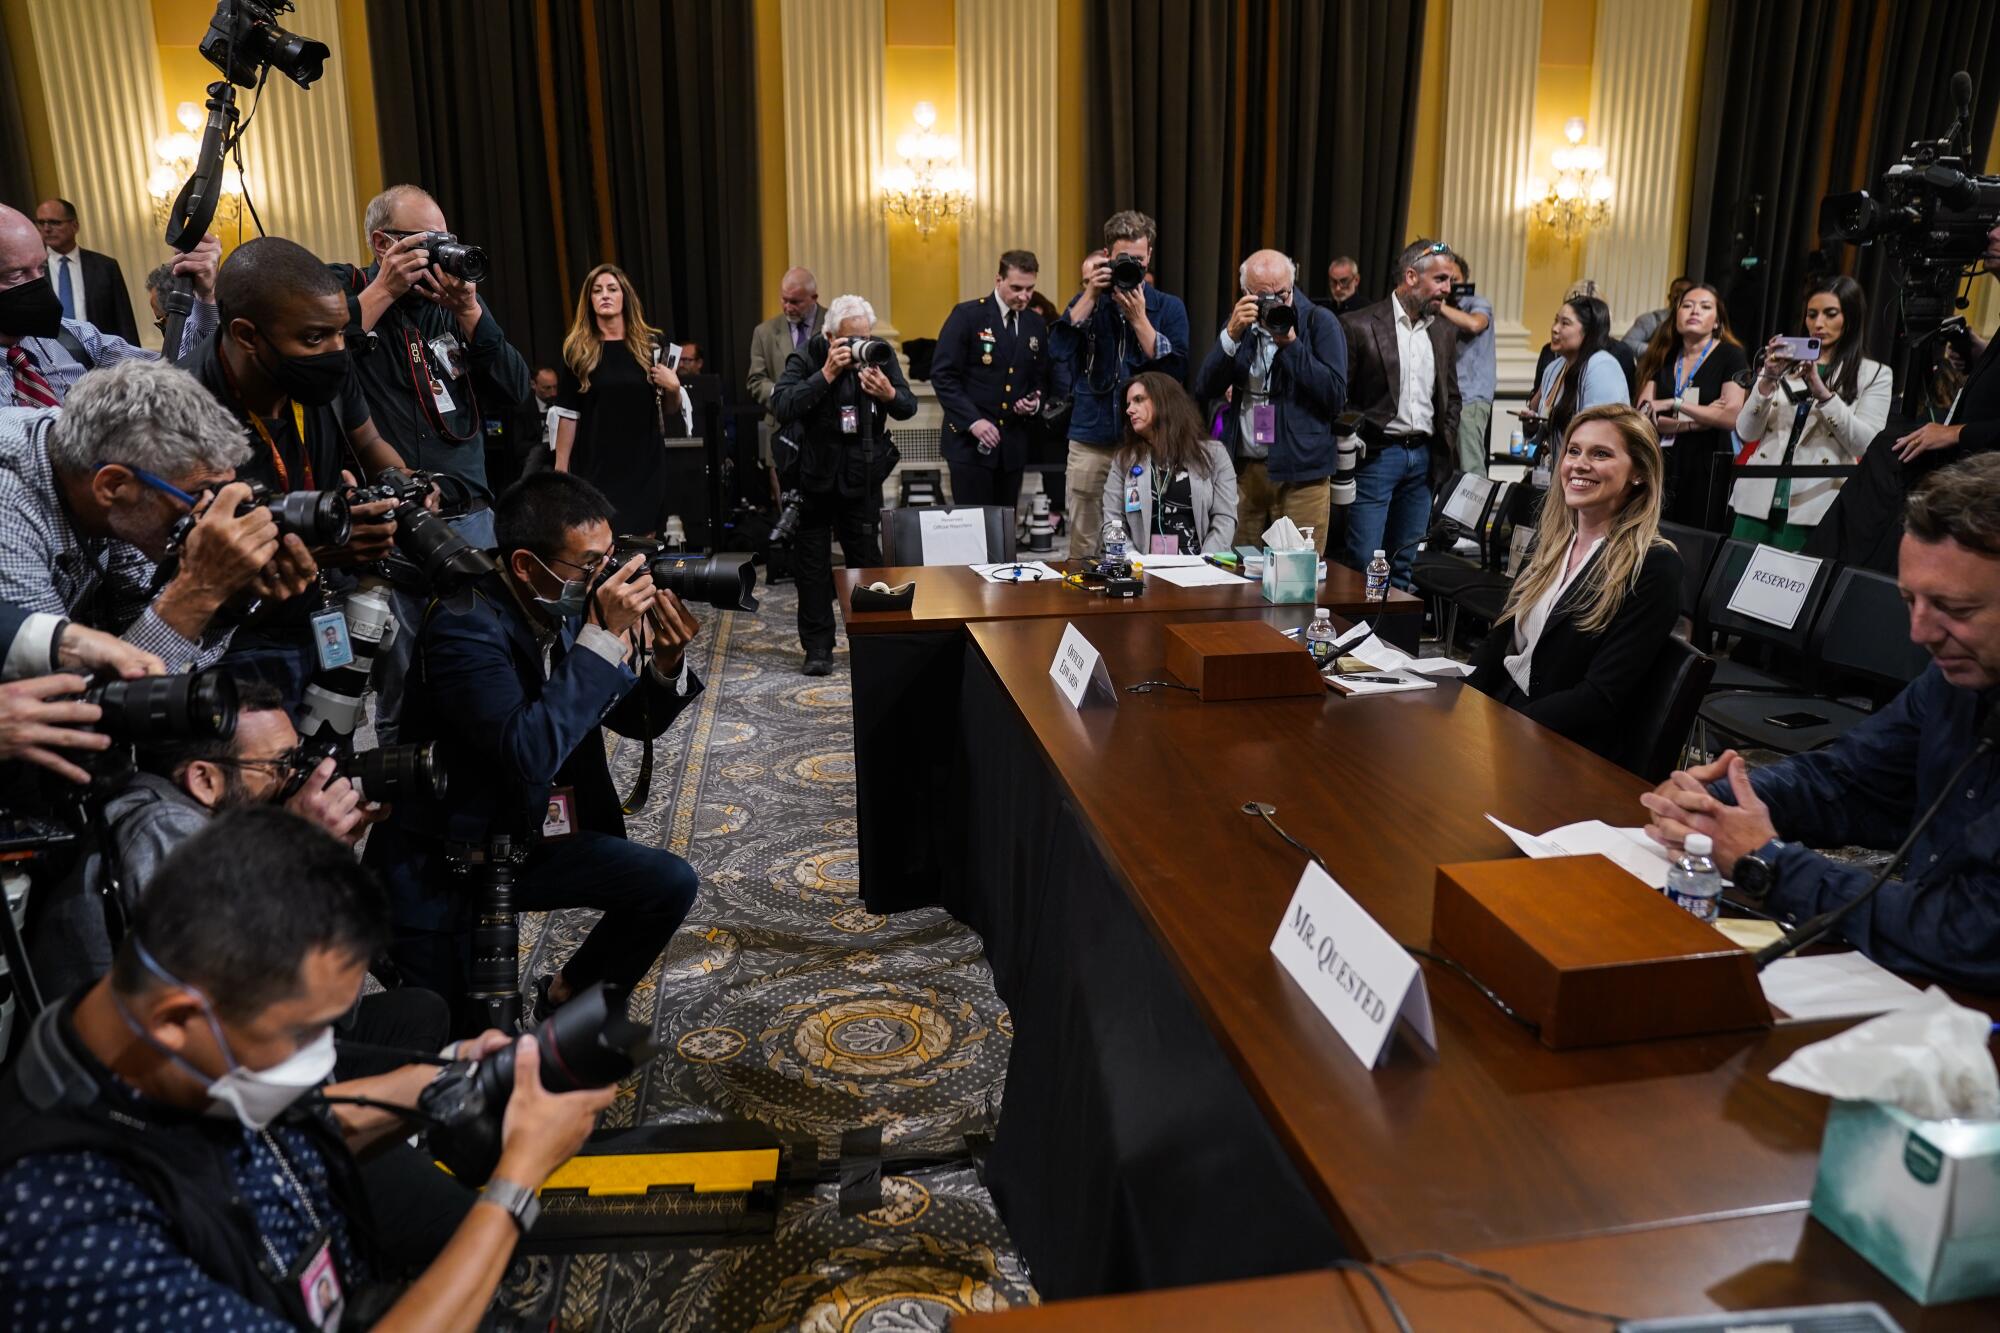 A bank of photographers taking pictures of a woman and a man seated at a witness table in an ornate hearing room